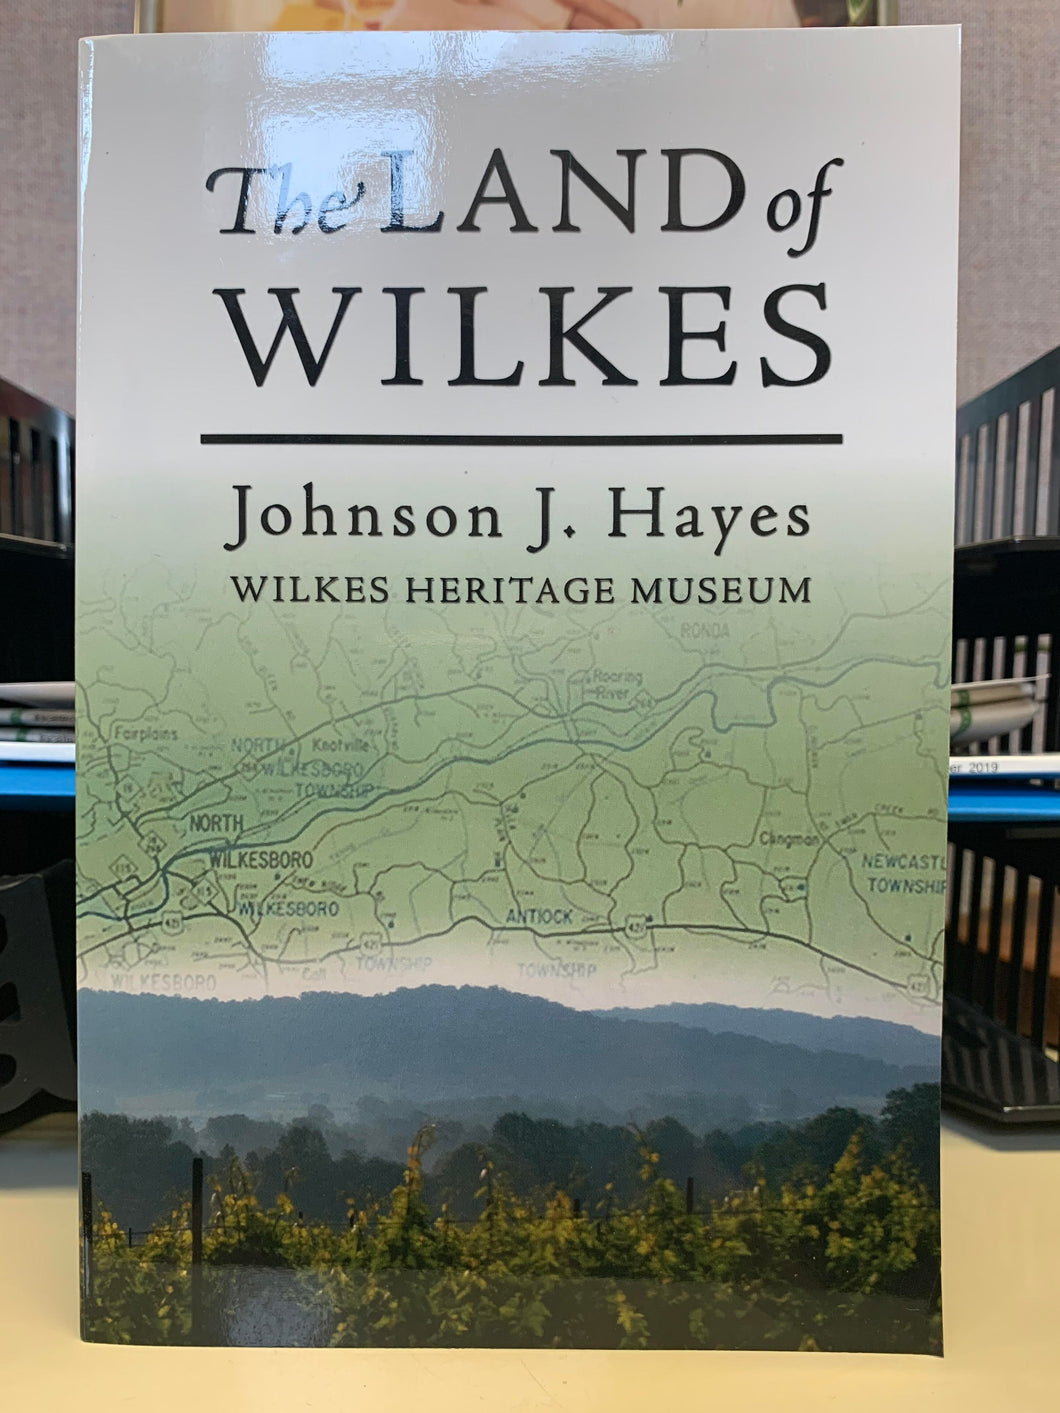 The Land of Wilkes by Johnson J. Hayes